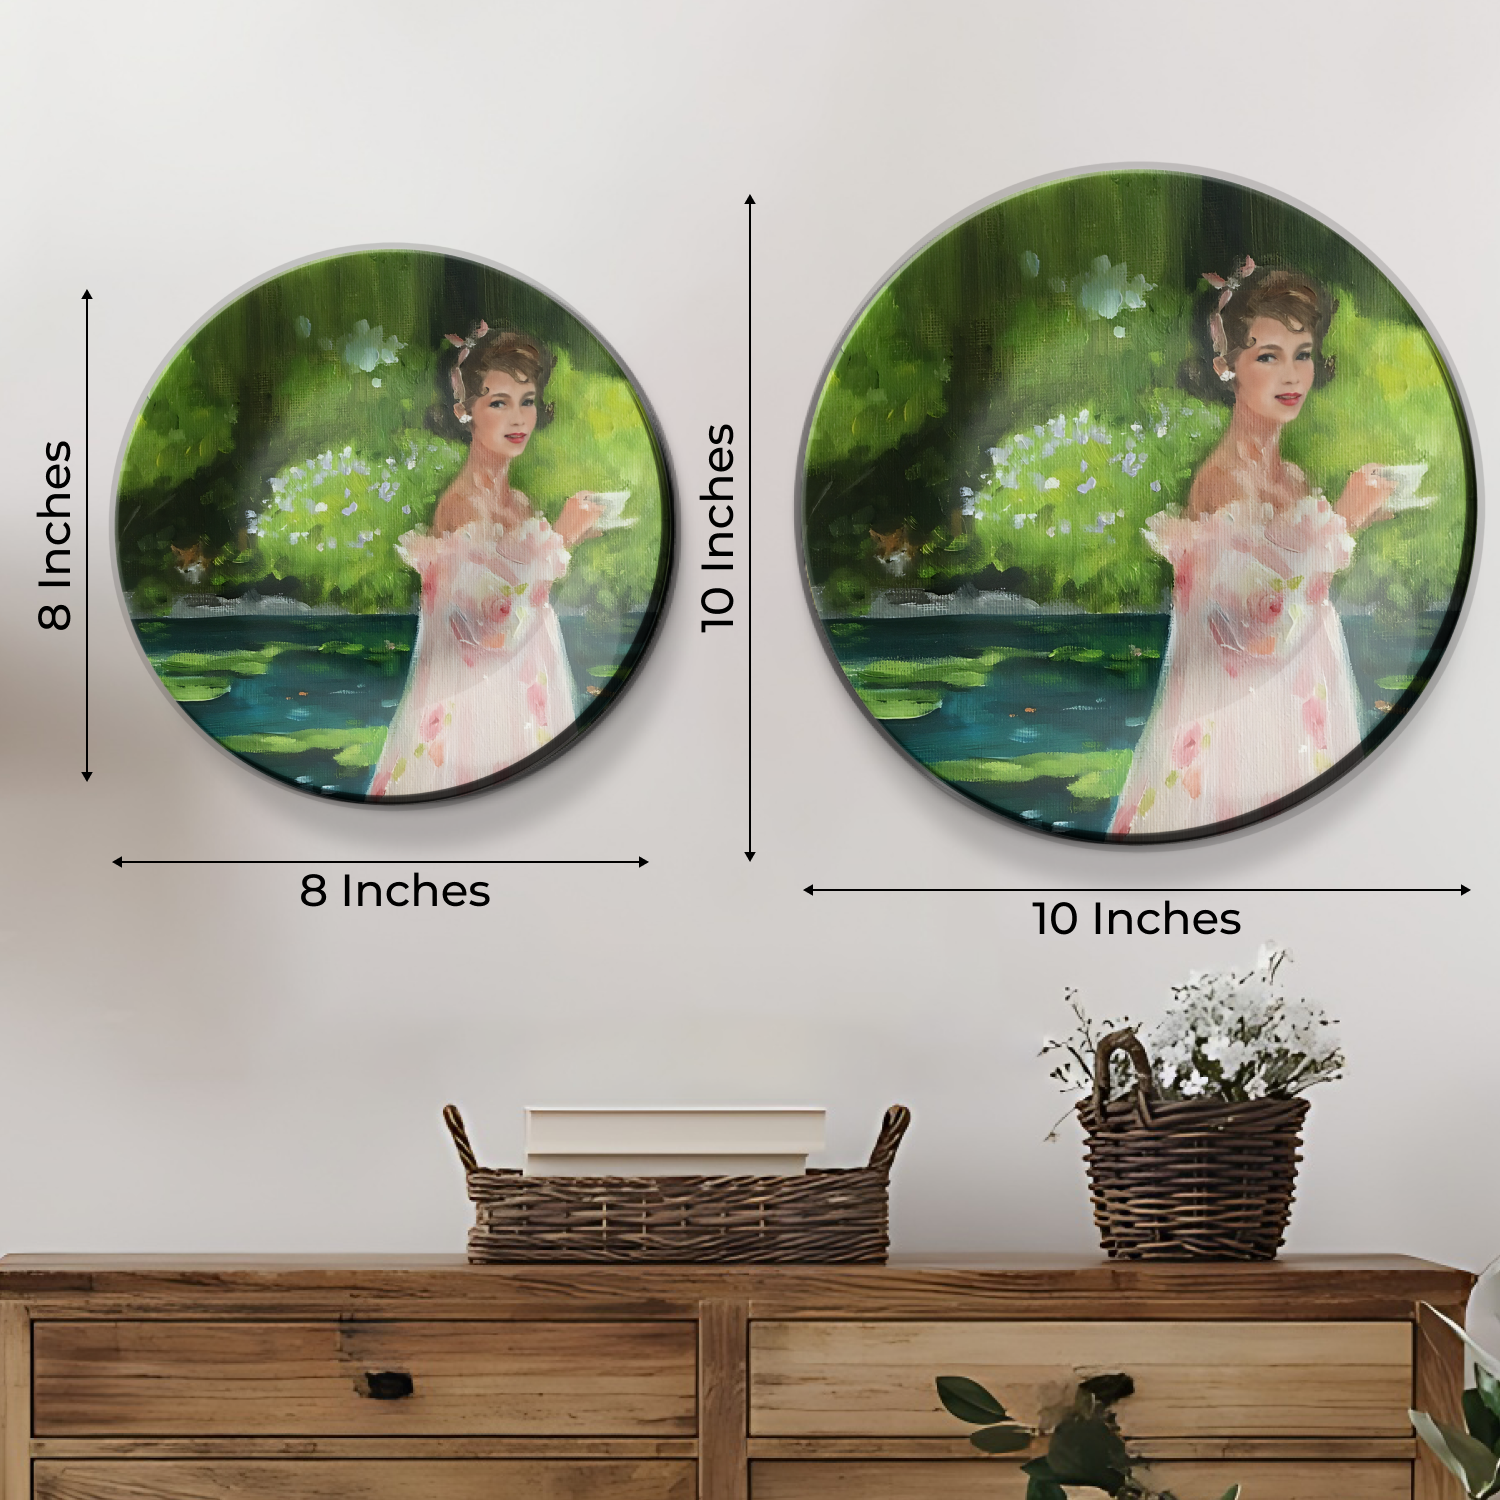 Unique garden-themed ceramic wall hanging plates for business